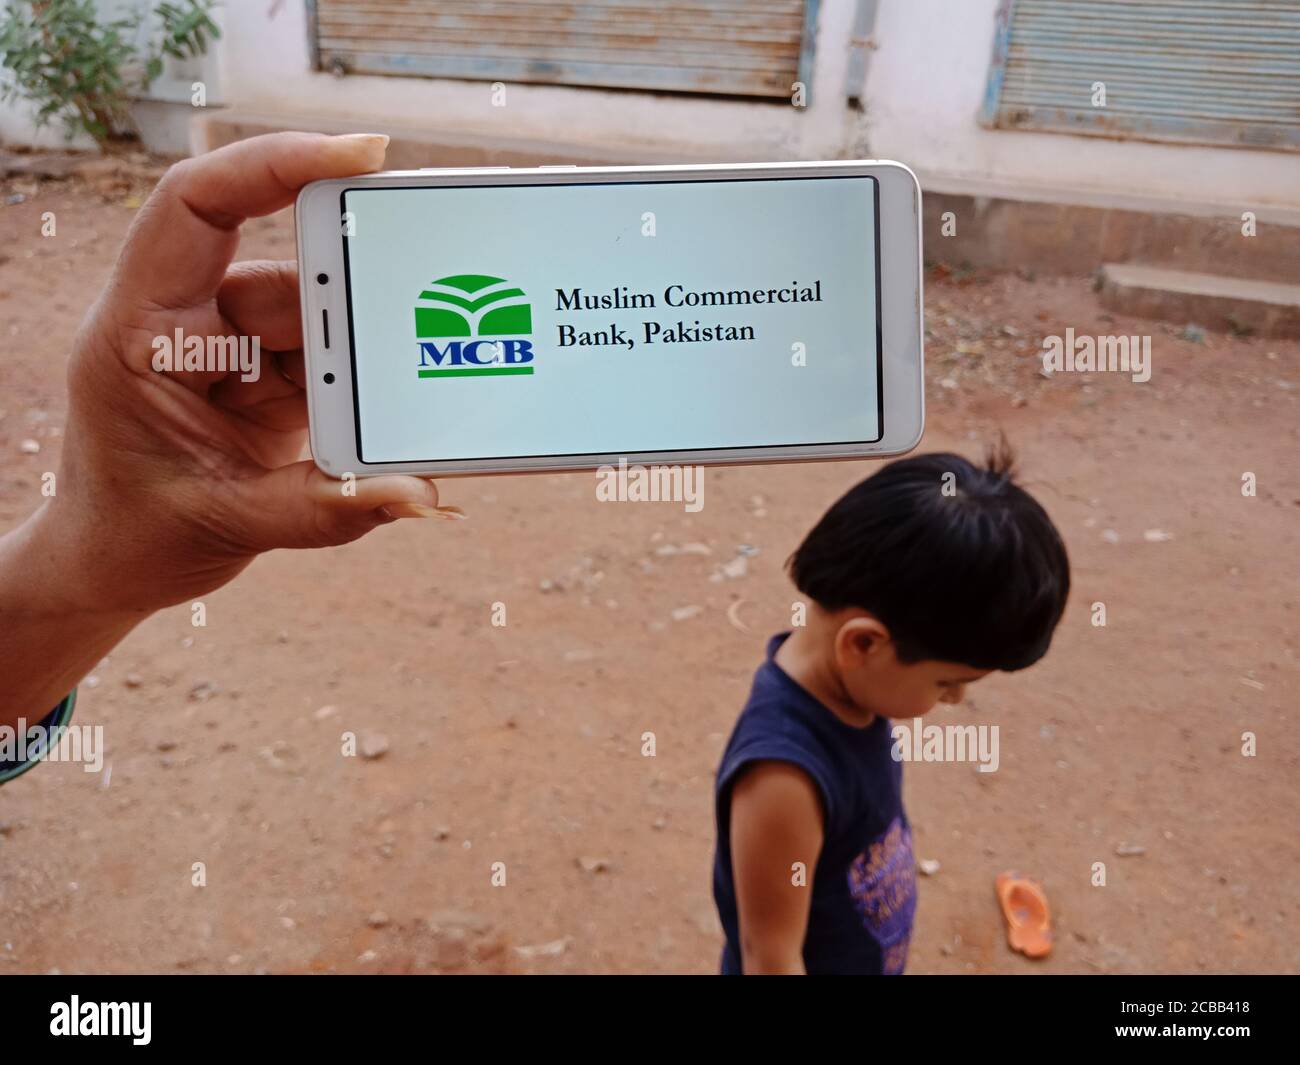 DISTRICT KATNI, INDIA - JUNE 02, 2020: An indian woman holding smart phone with displaying MCB muslim commercial bank limited logo on screen, modern b Stock Photo